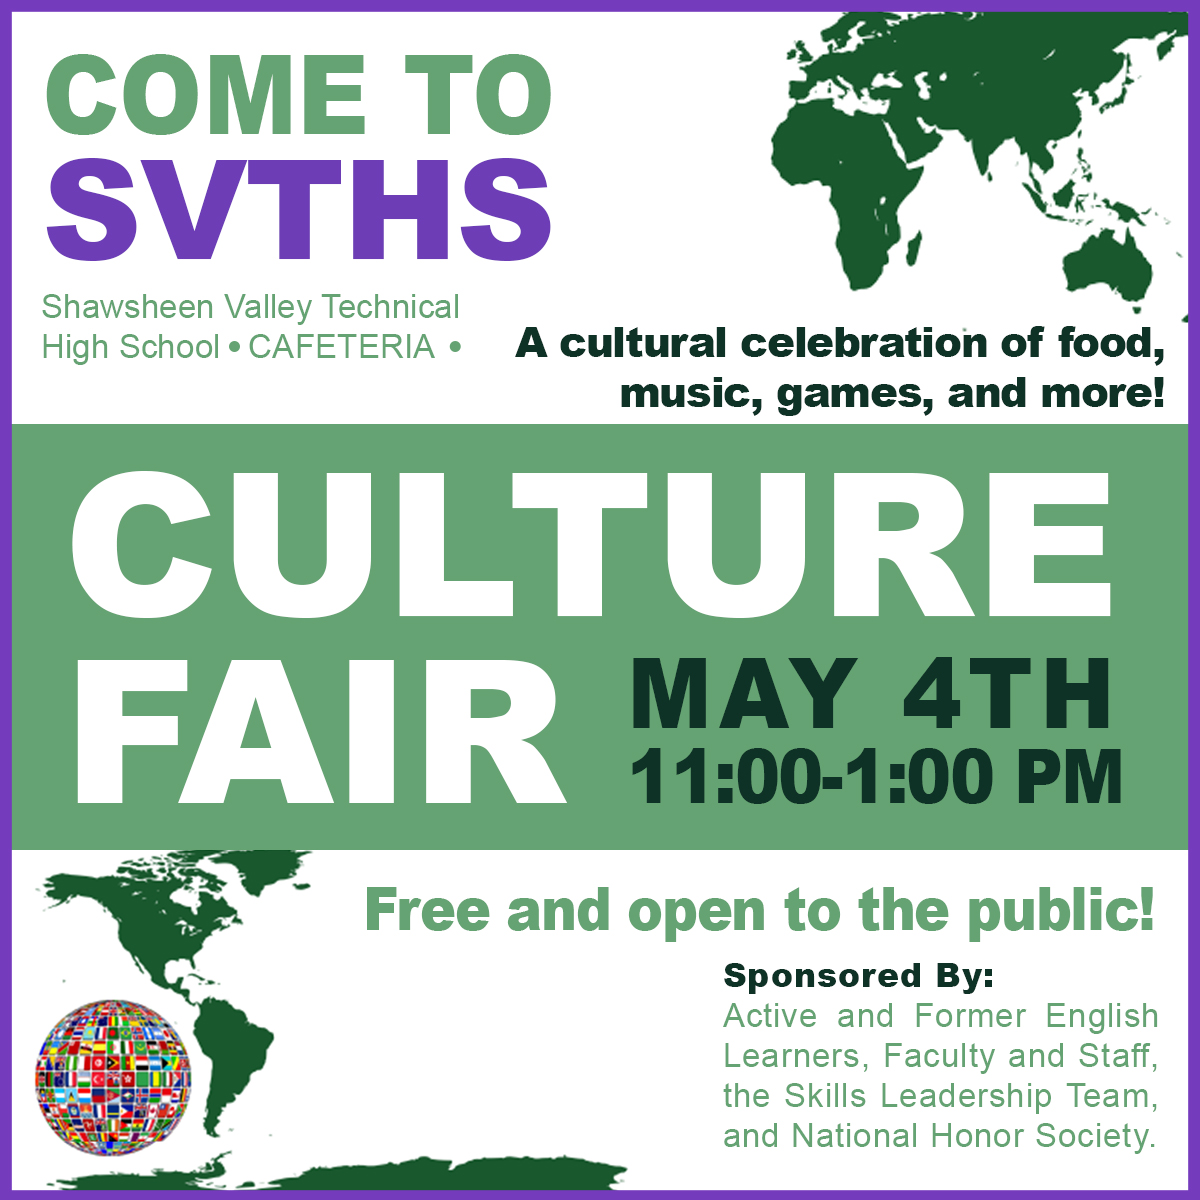 📅 Mark your calendars! 🎉 Shawsheen's first annual Culture Fair is happening on Saturday, May 4th, from 11:00am to 1:00pm in the cafeteria. This student-led event is free and open to everyone. Come one, come all! Let's embrace diversity together. #WeAreShawsheen